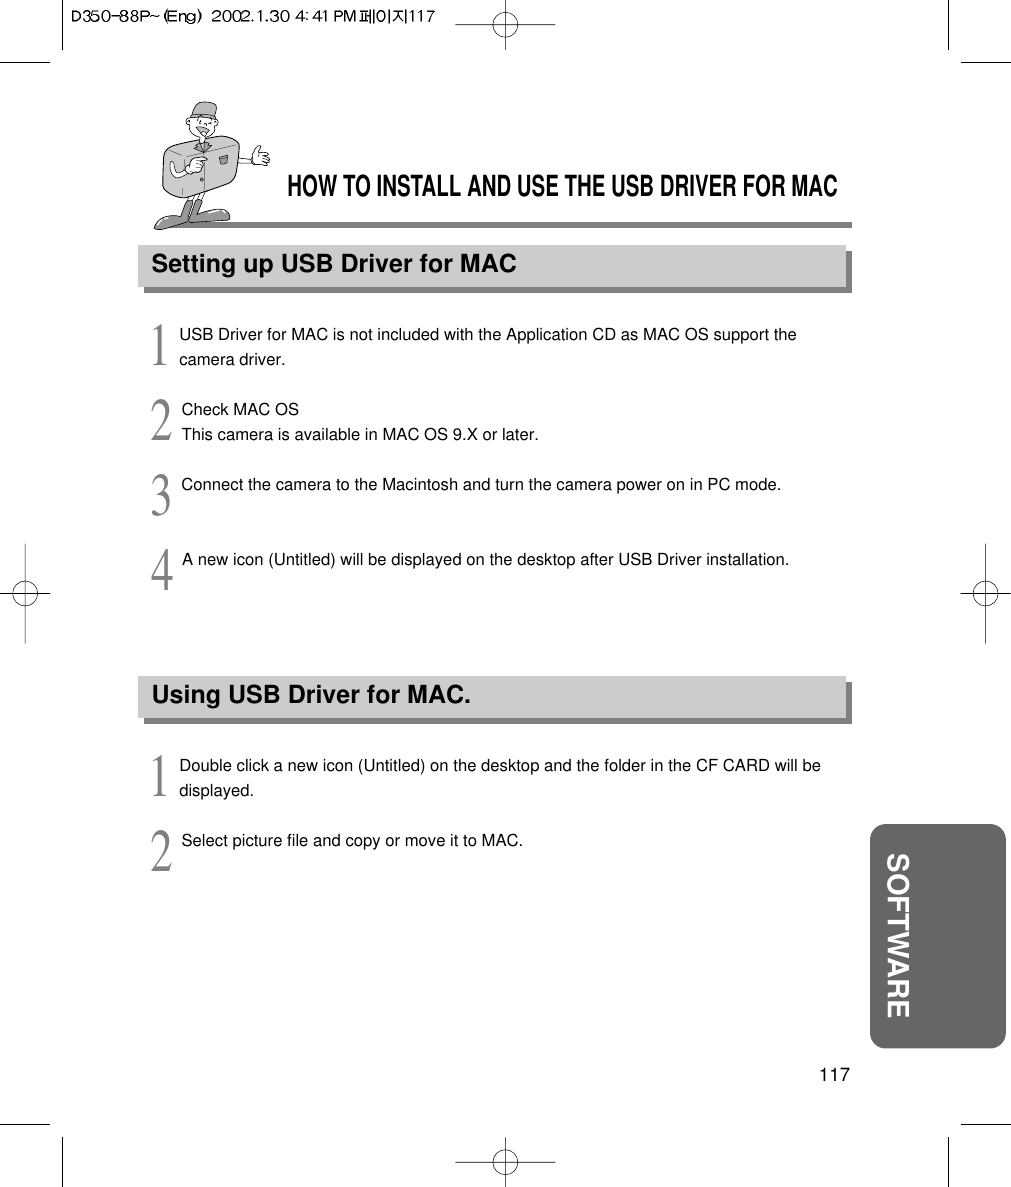 HOW TO INSTALL AND USE THE USB DRIVER FOR MACSetting up USB Driver for MAC117SOFTWARE1USB Driver for MAC is not included with the Application CD as MAC OS support thecamera driver.2Check MAC OSThis camera is available in MAC OS 9.X or later.3Connect the camera to the Macintosh and turn the camera power on in PC mode.4A new icon (Untitled) will be displayed on the desktop after USB Driver installation.Using USB Driver for MAC.1Double click a new icon (Untitled) on the desktop and the folder in the CF CARD will bedisplayed.2Select picture file and copy or move it to MAC.